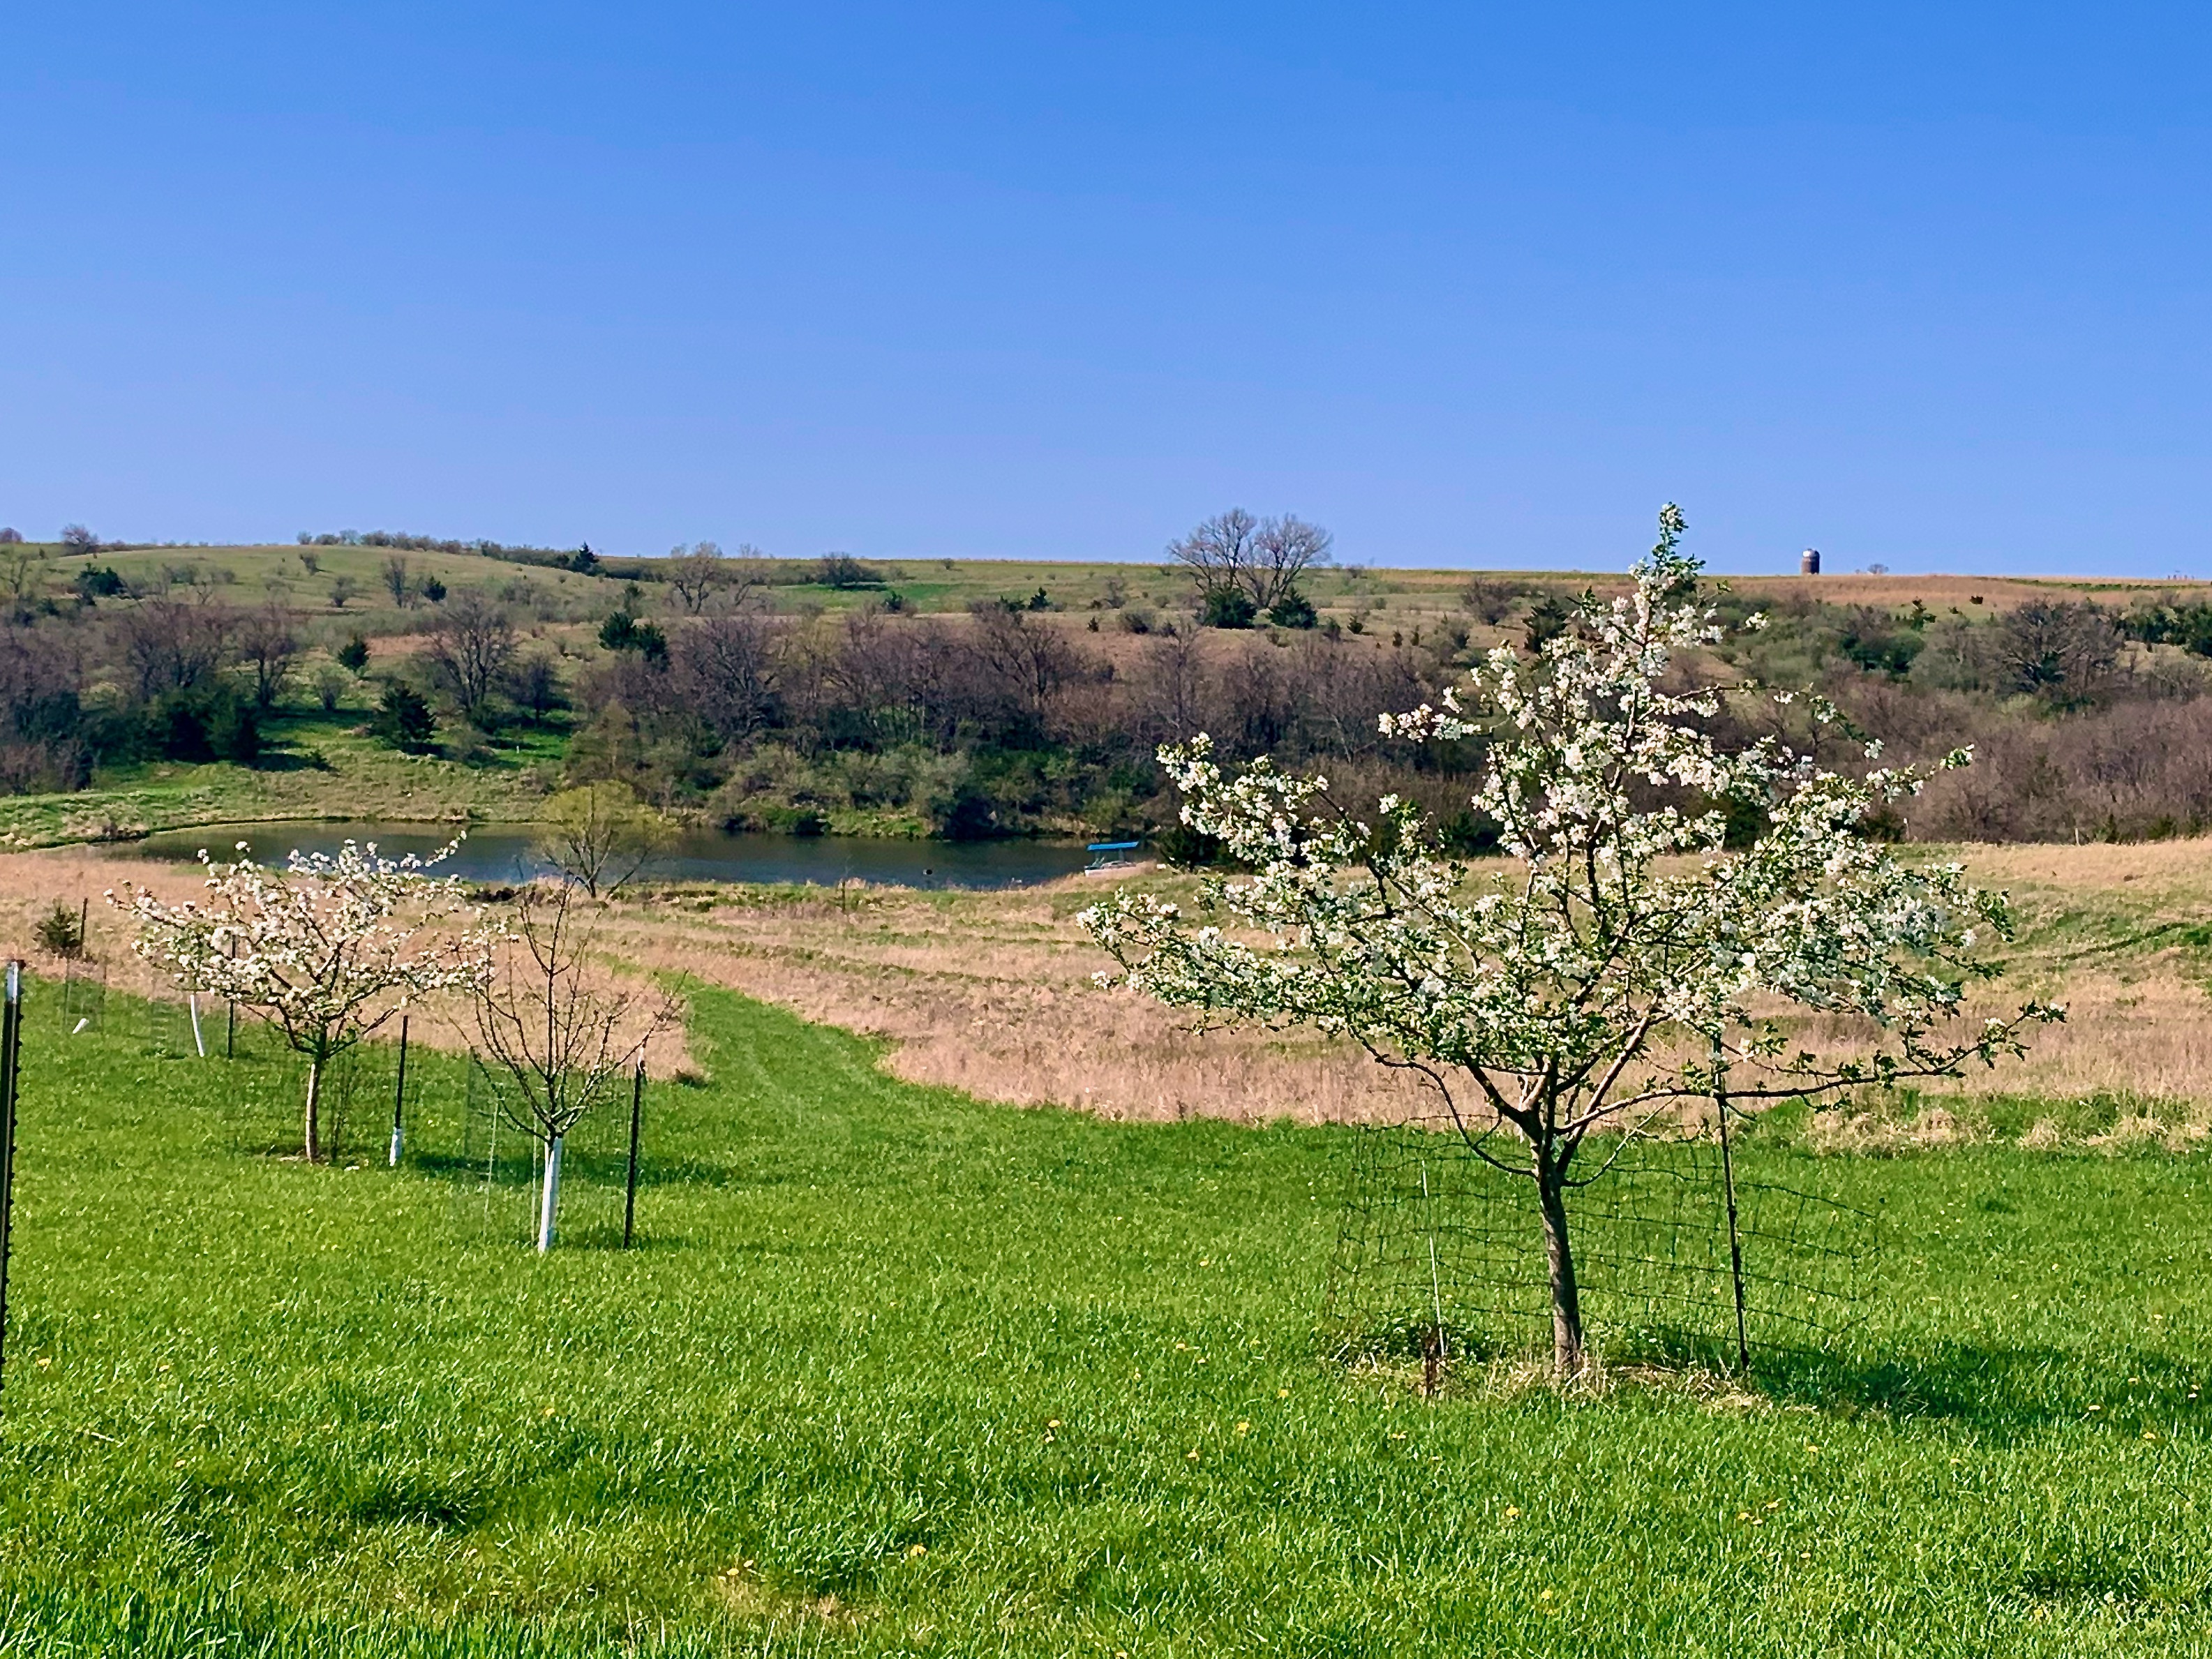 Blooming apple trees grown in a sustainable old world style called Streuobstwiese 